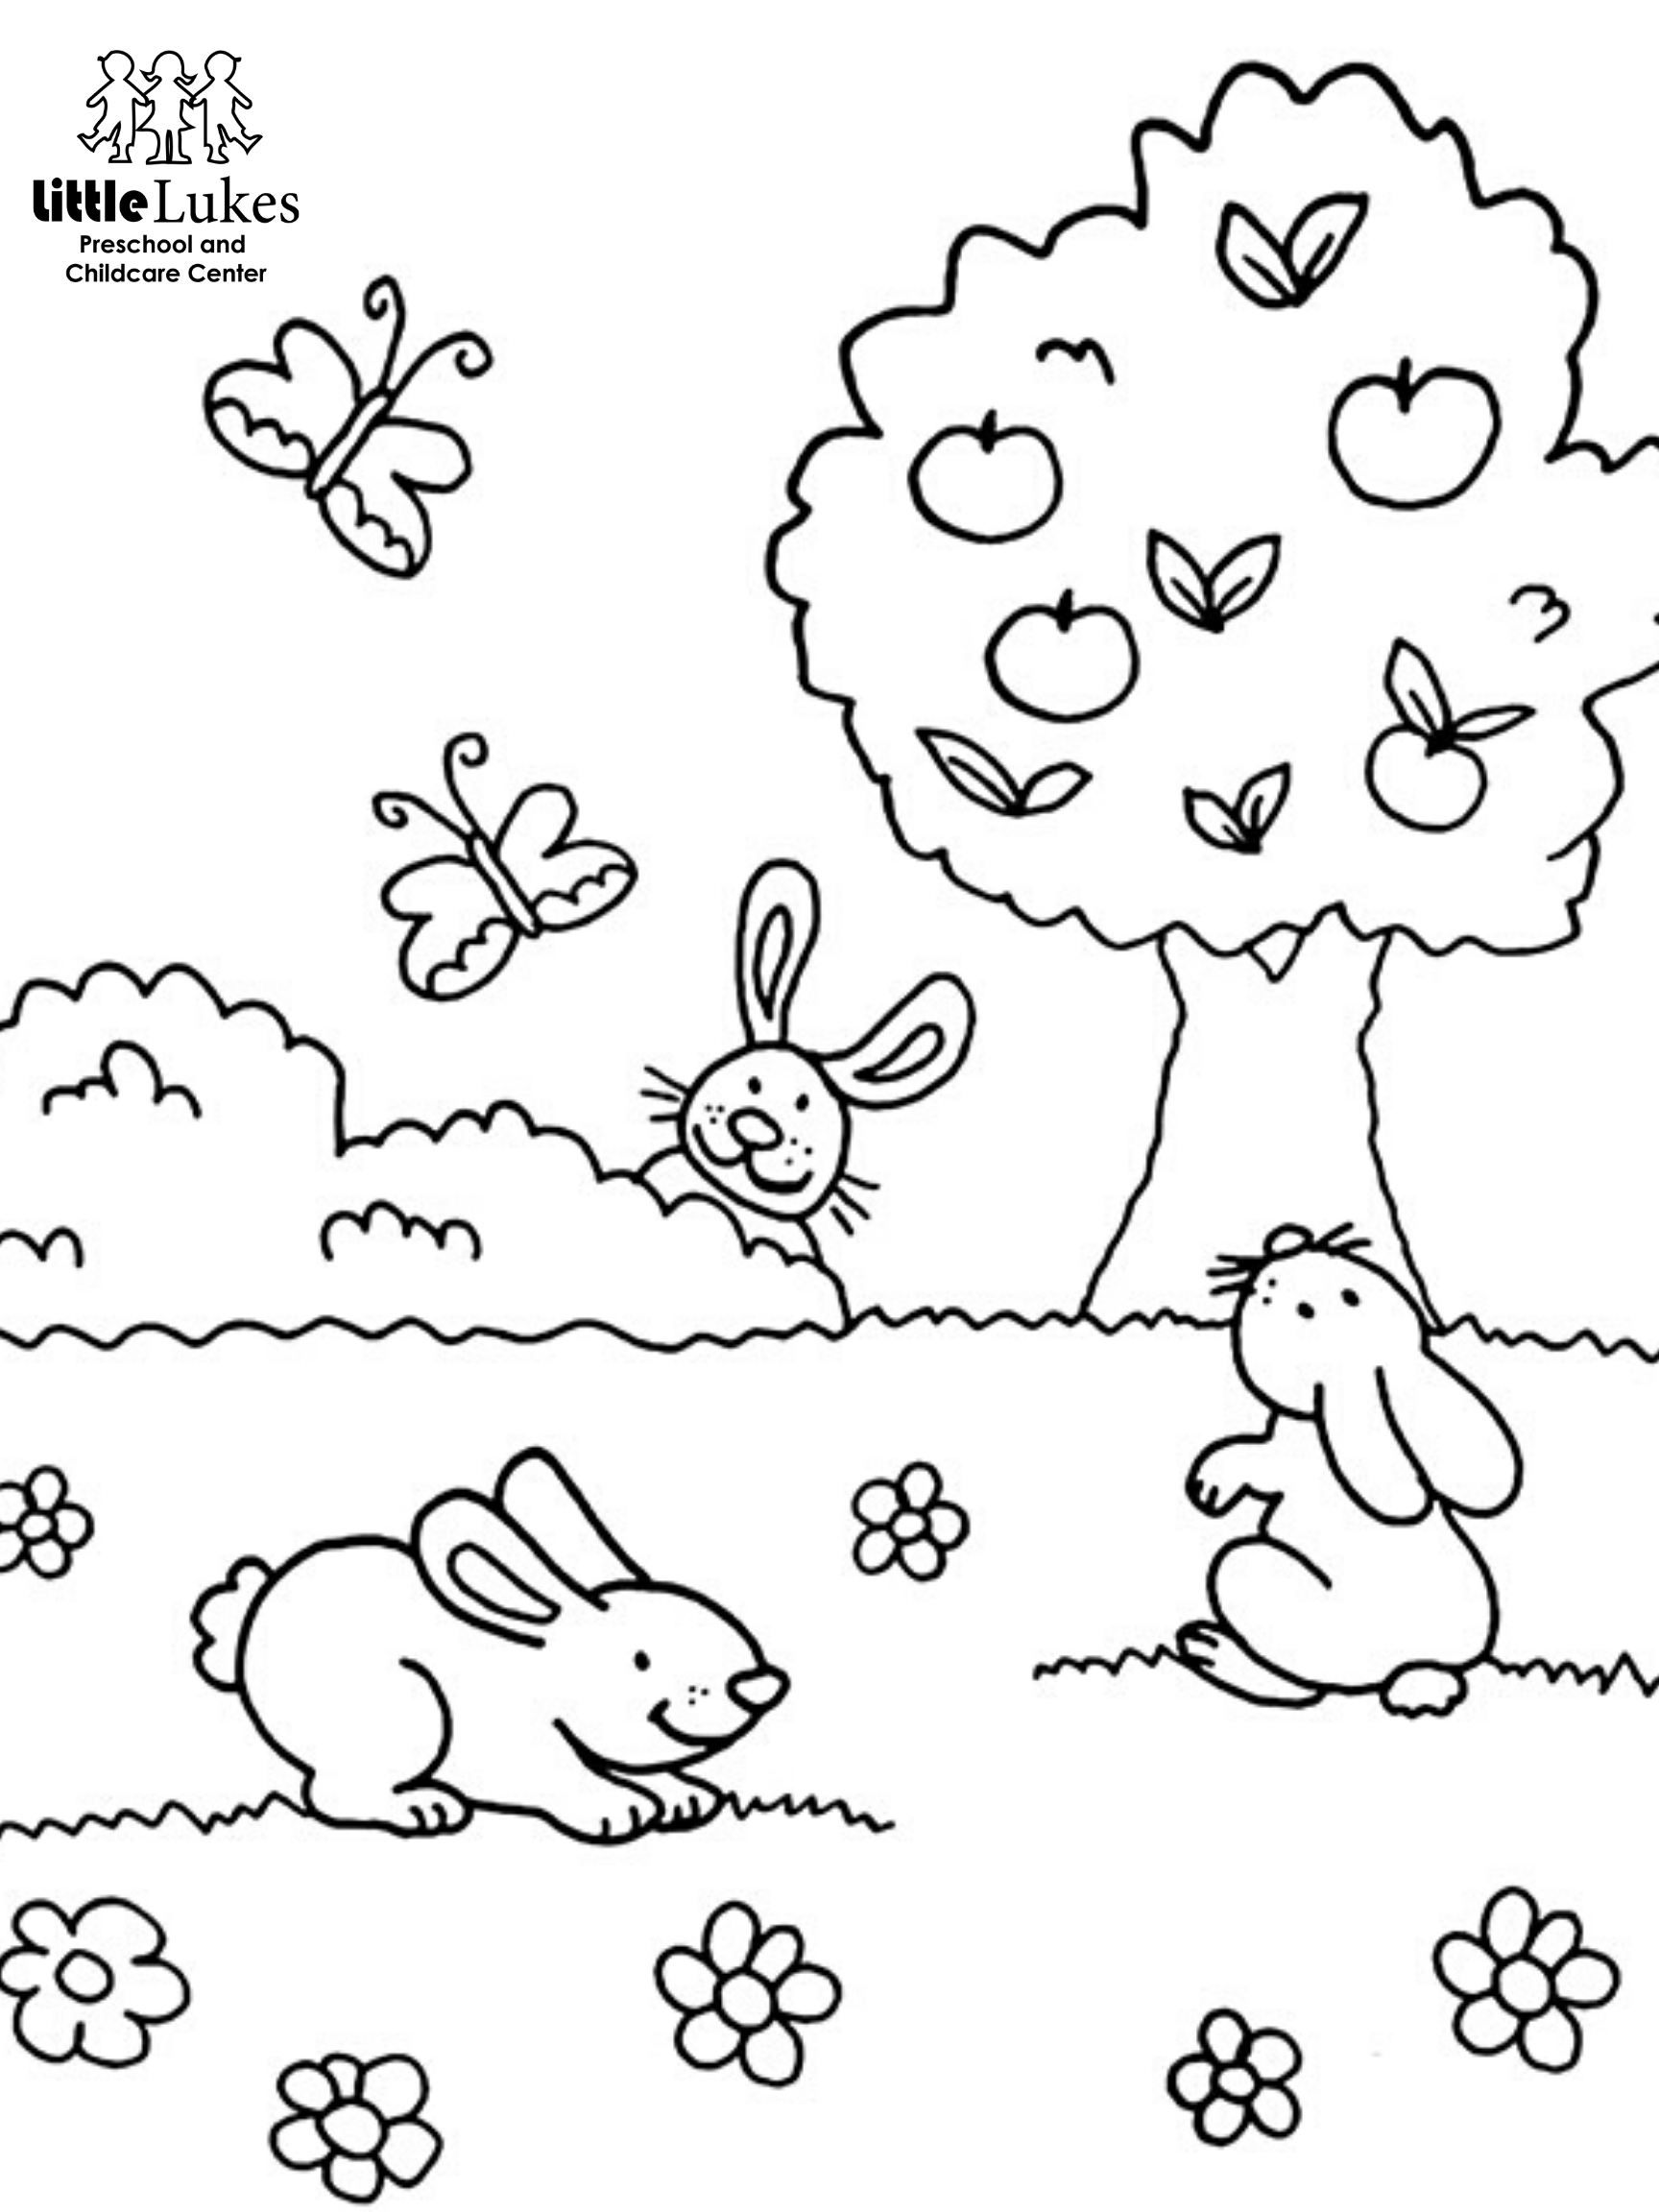 FREE Spring Coloring Pages   Little Lukes Preschool and Childcare ...